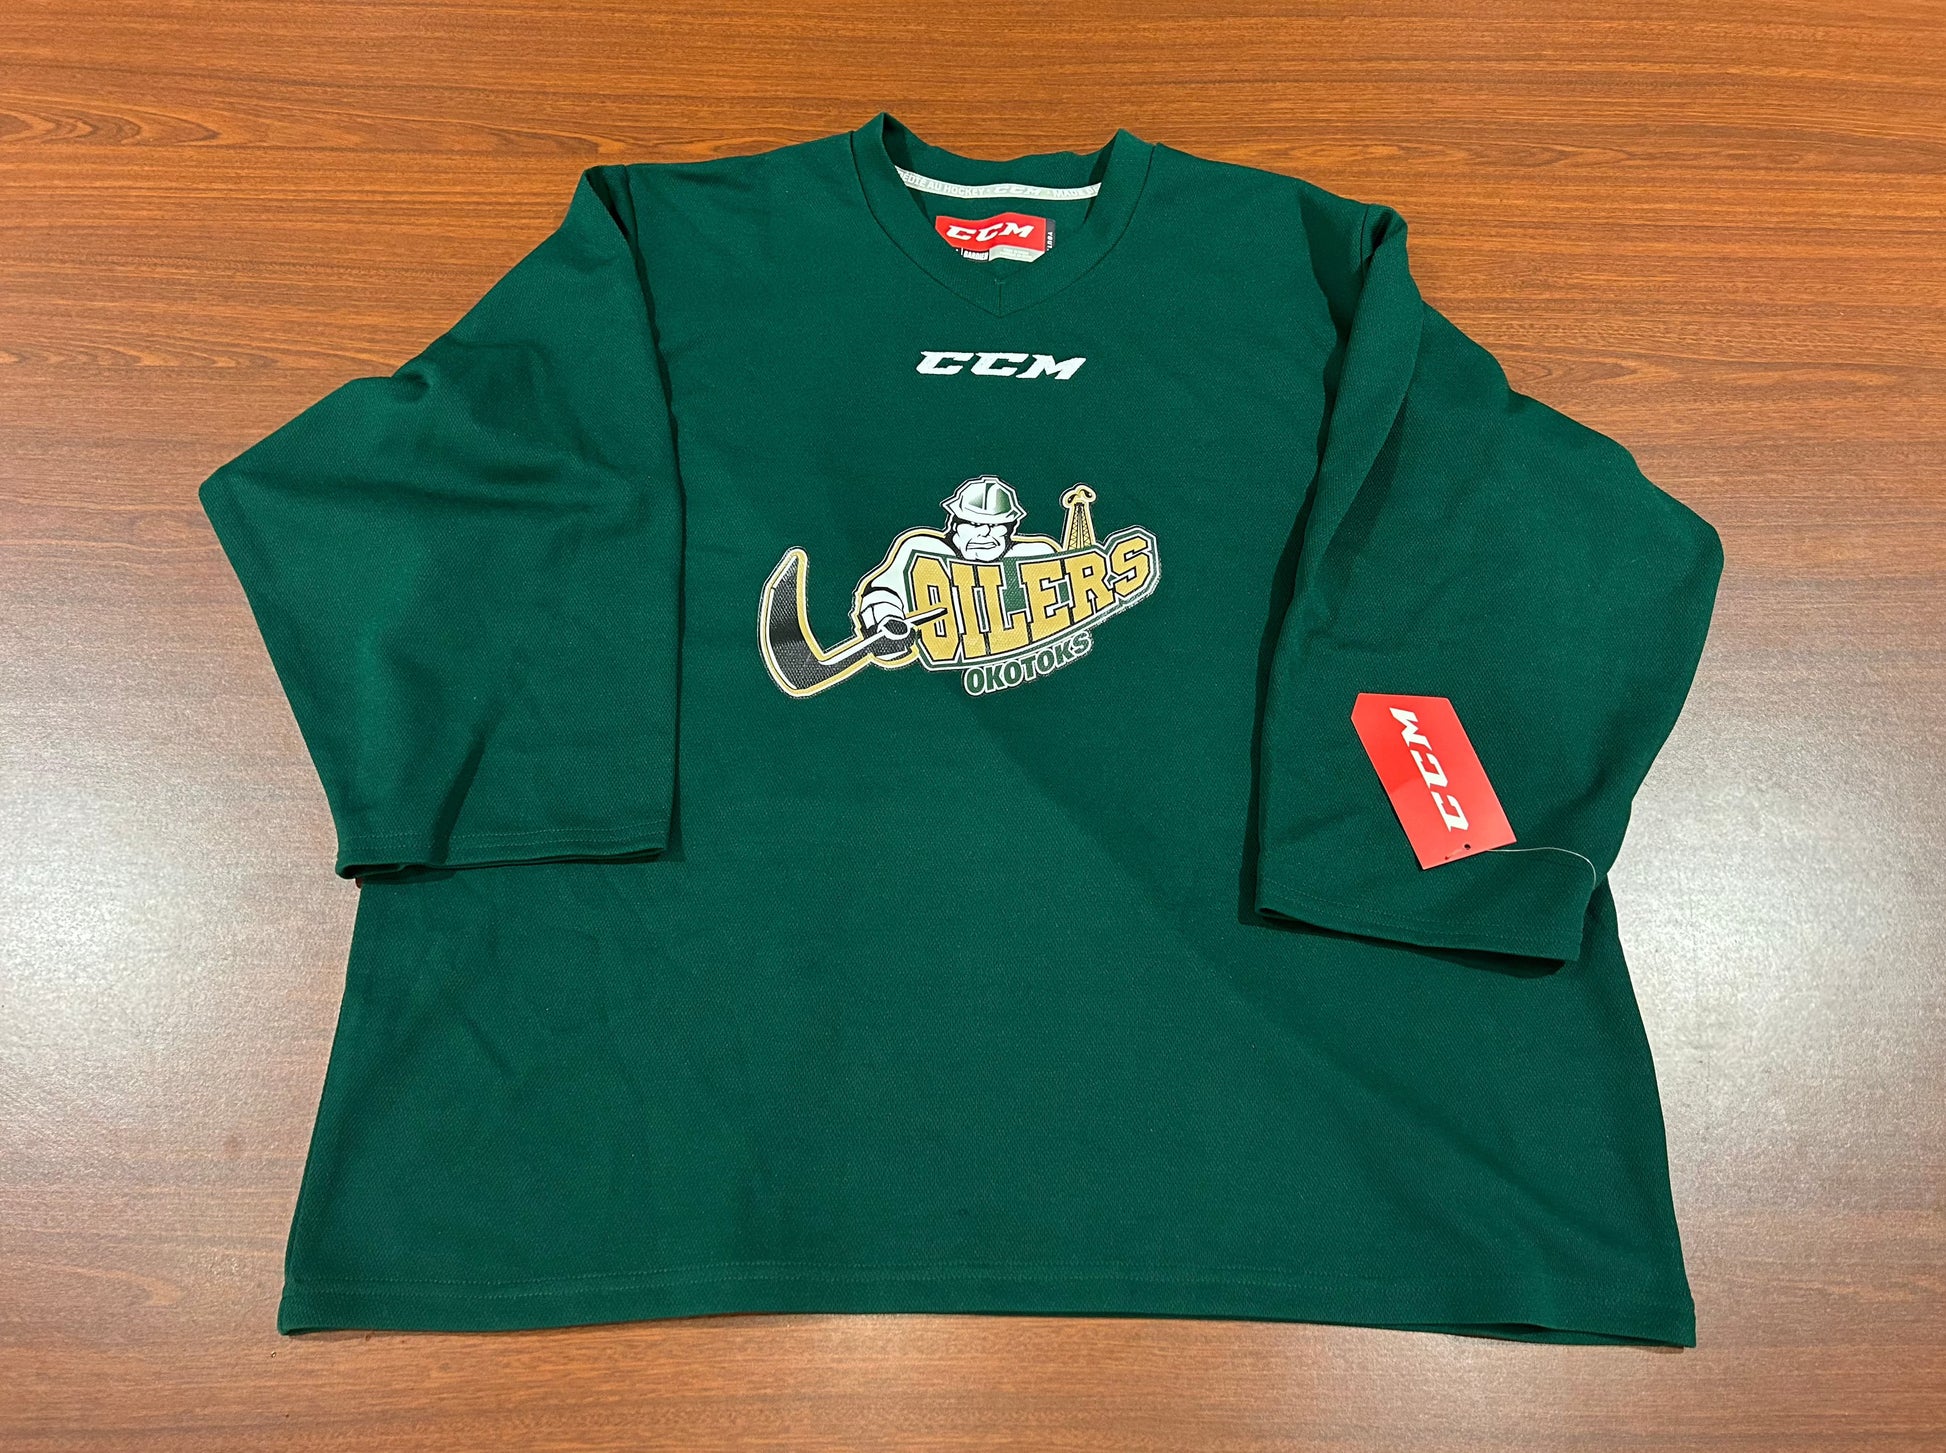 Green jersey with the Oilers' primary logo on the chest underneath the CCM logo.